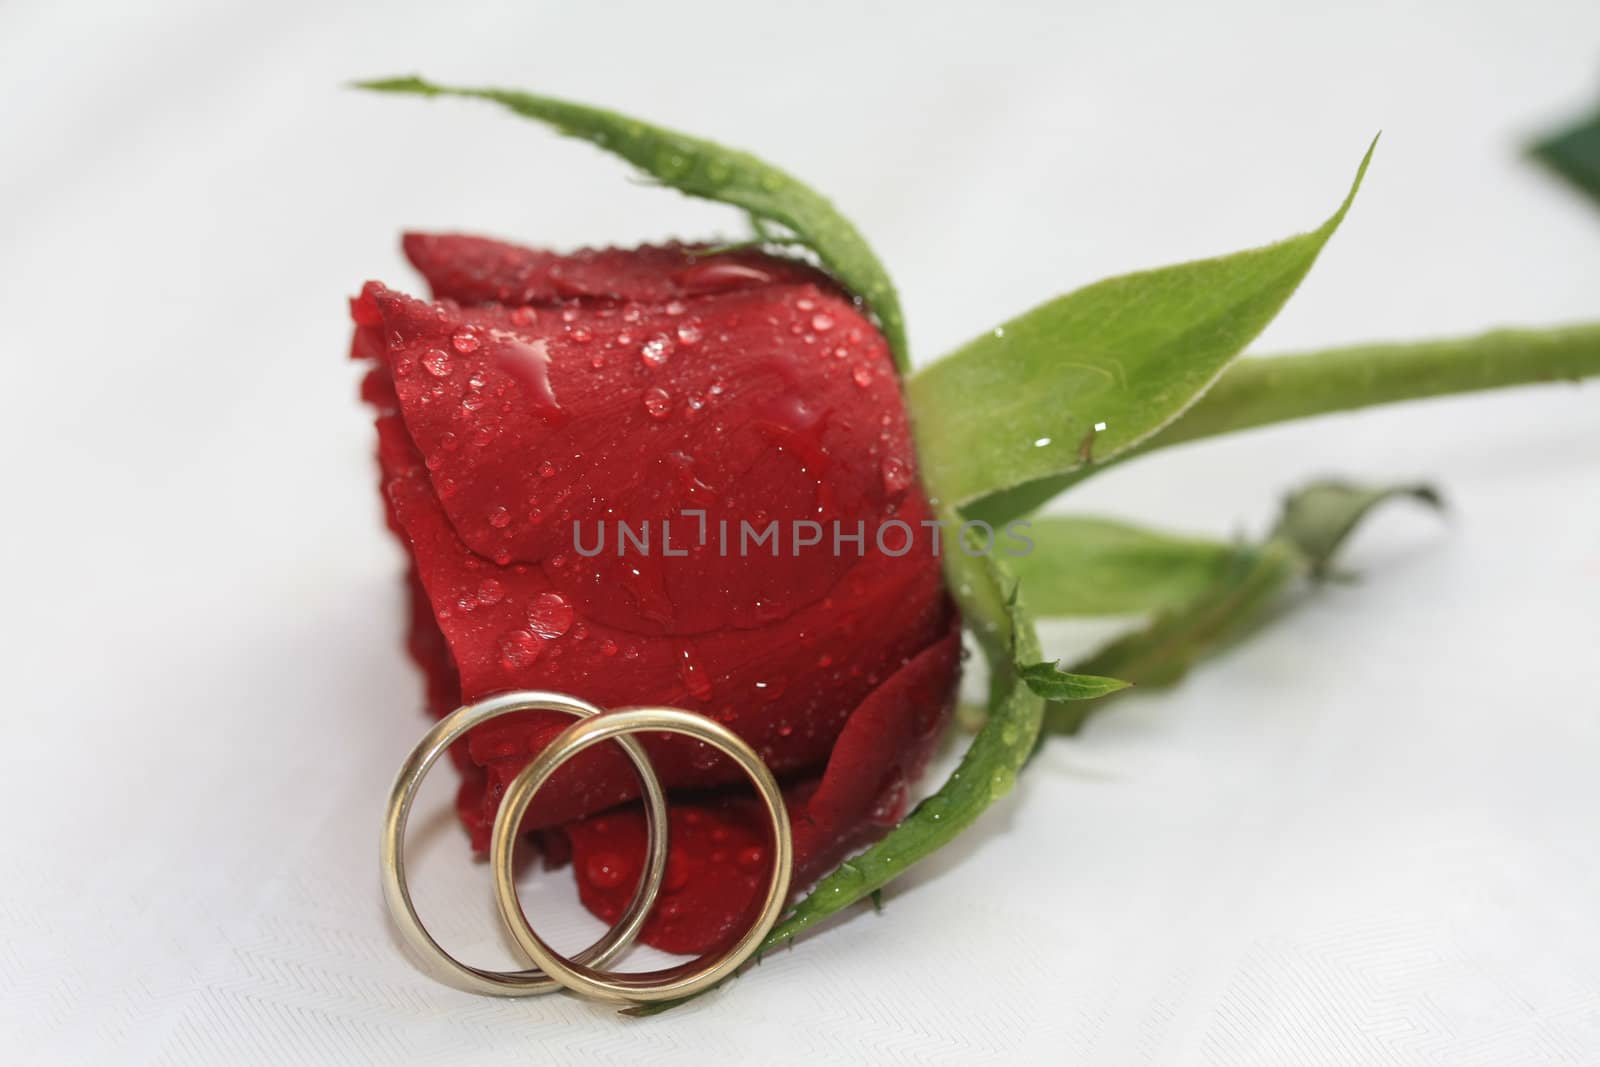 Wedding bands and a red rose by studioportosabbia